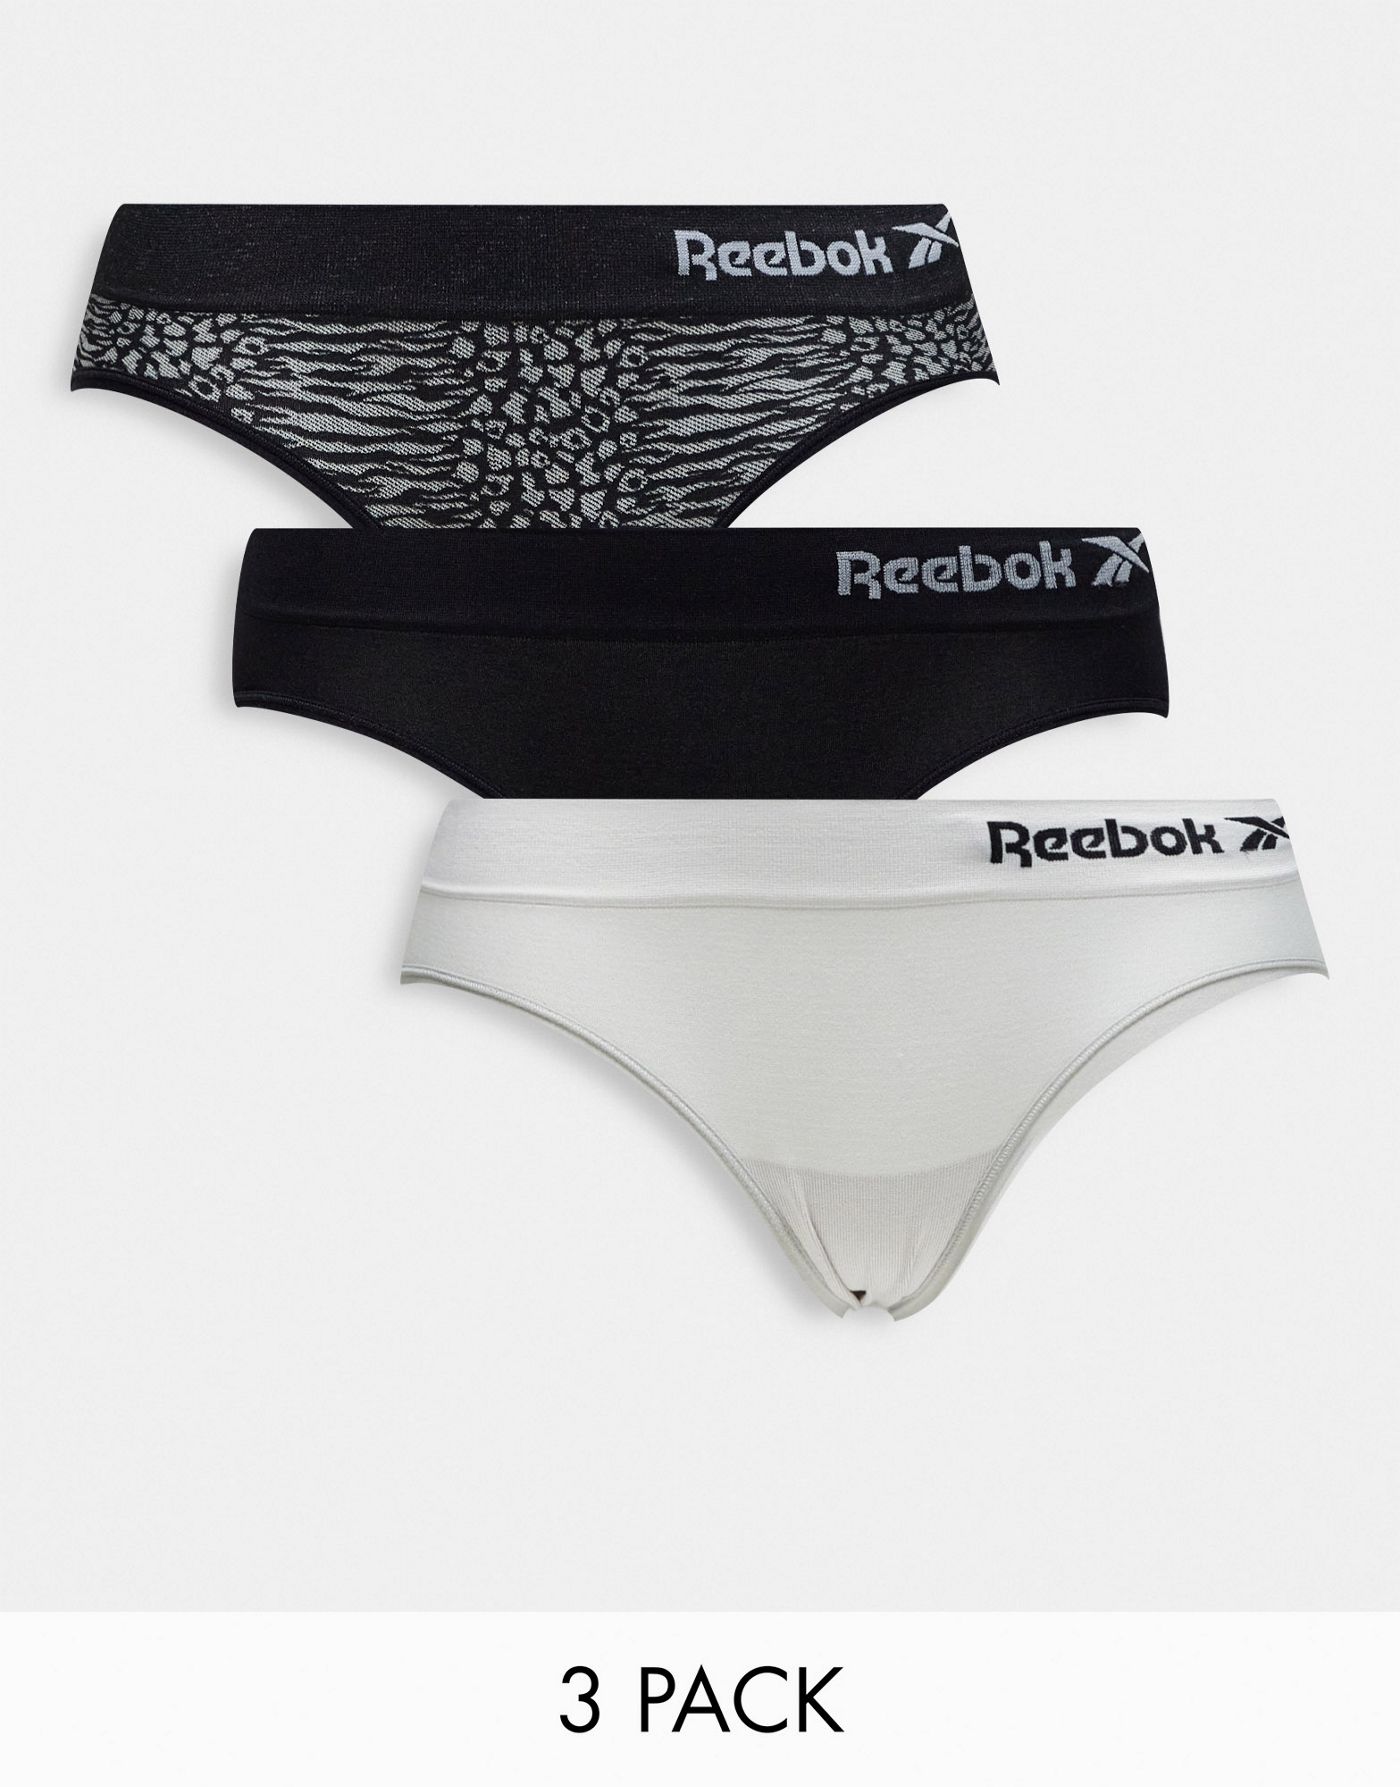 Reebok anthia seamless 3 pack briefs in grey and black jacquard mix